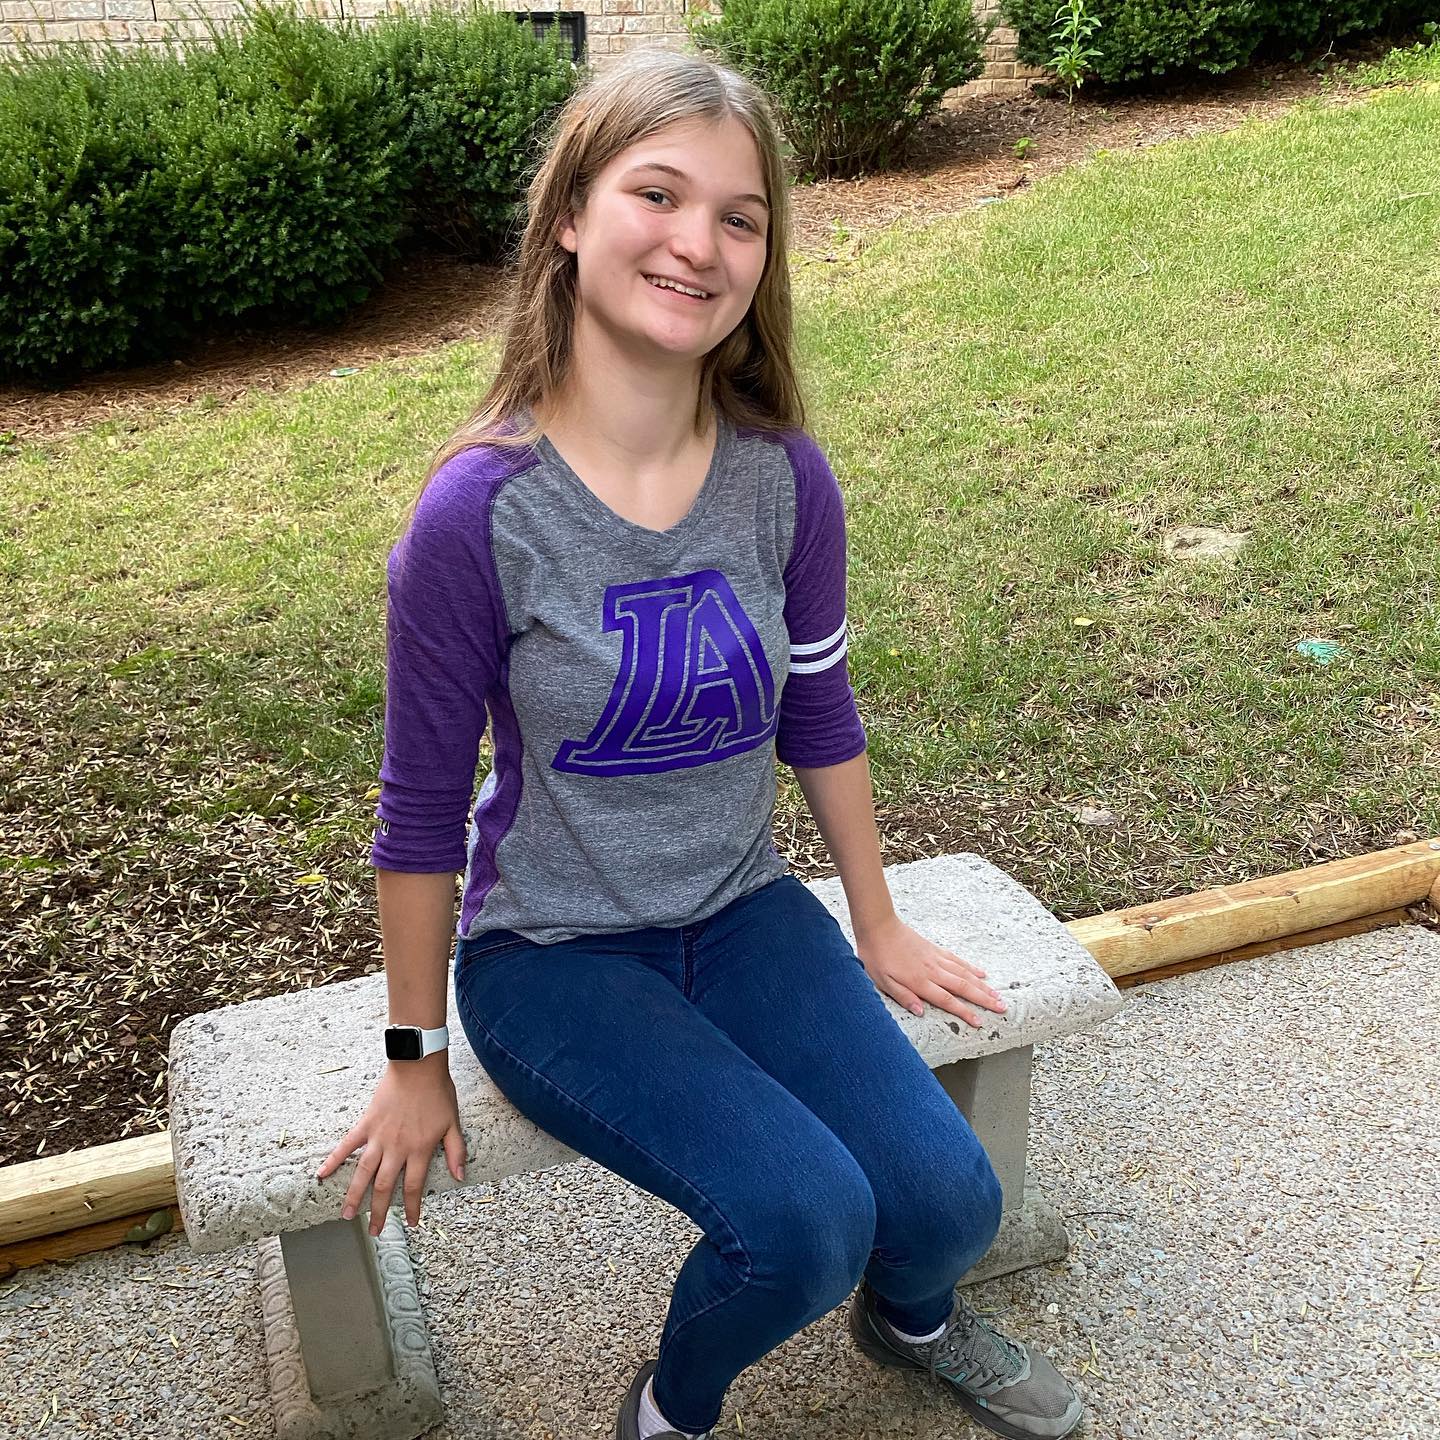 Guess who was selected as the Sophomore representative for the Homecoming Court at @lipscombacademy ... This girl (@kateagee)! We are so proud of her!! #family